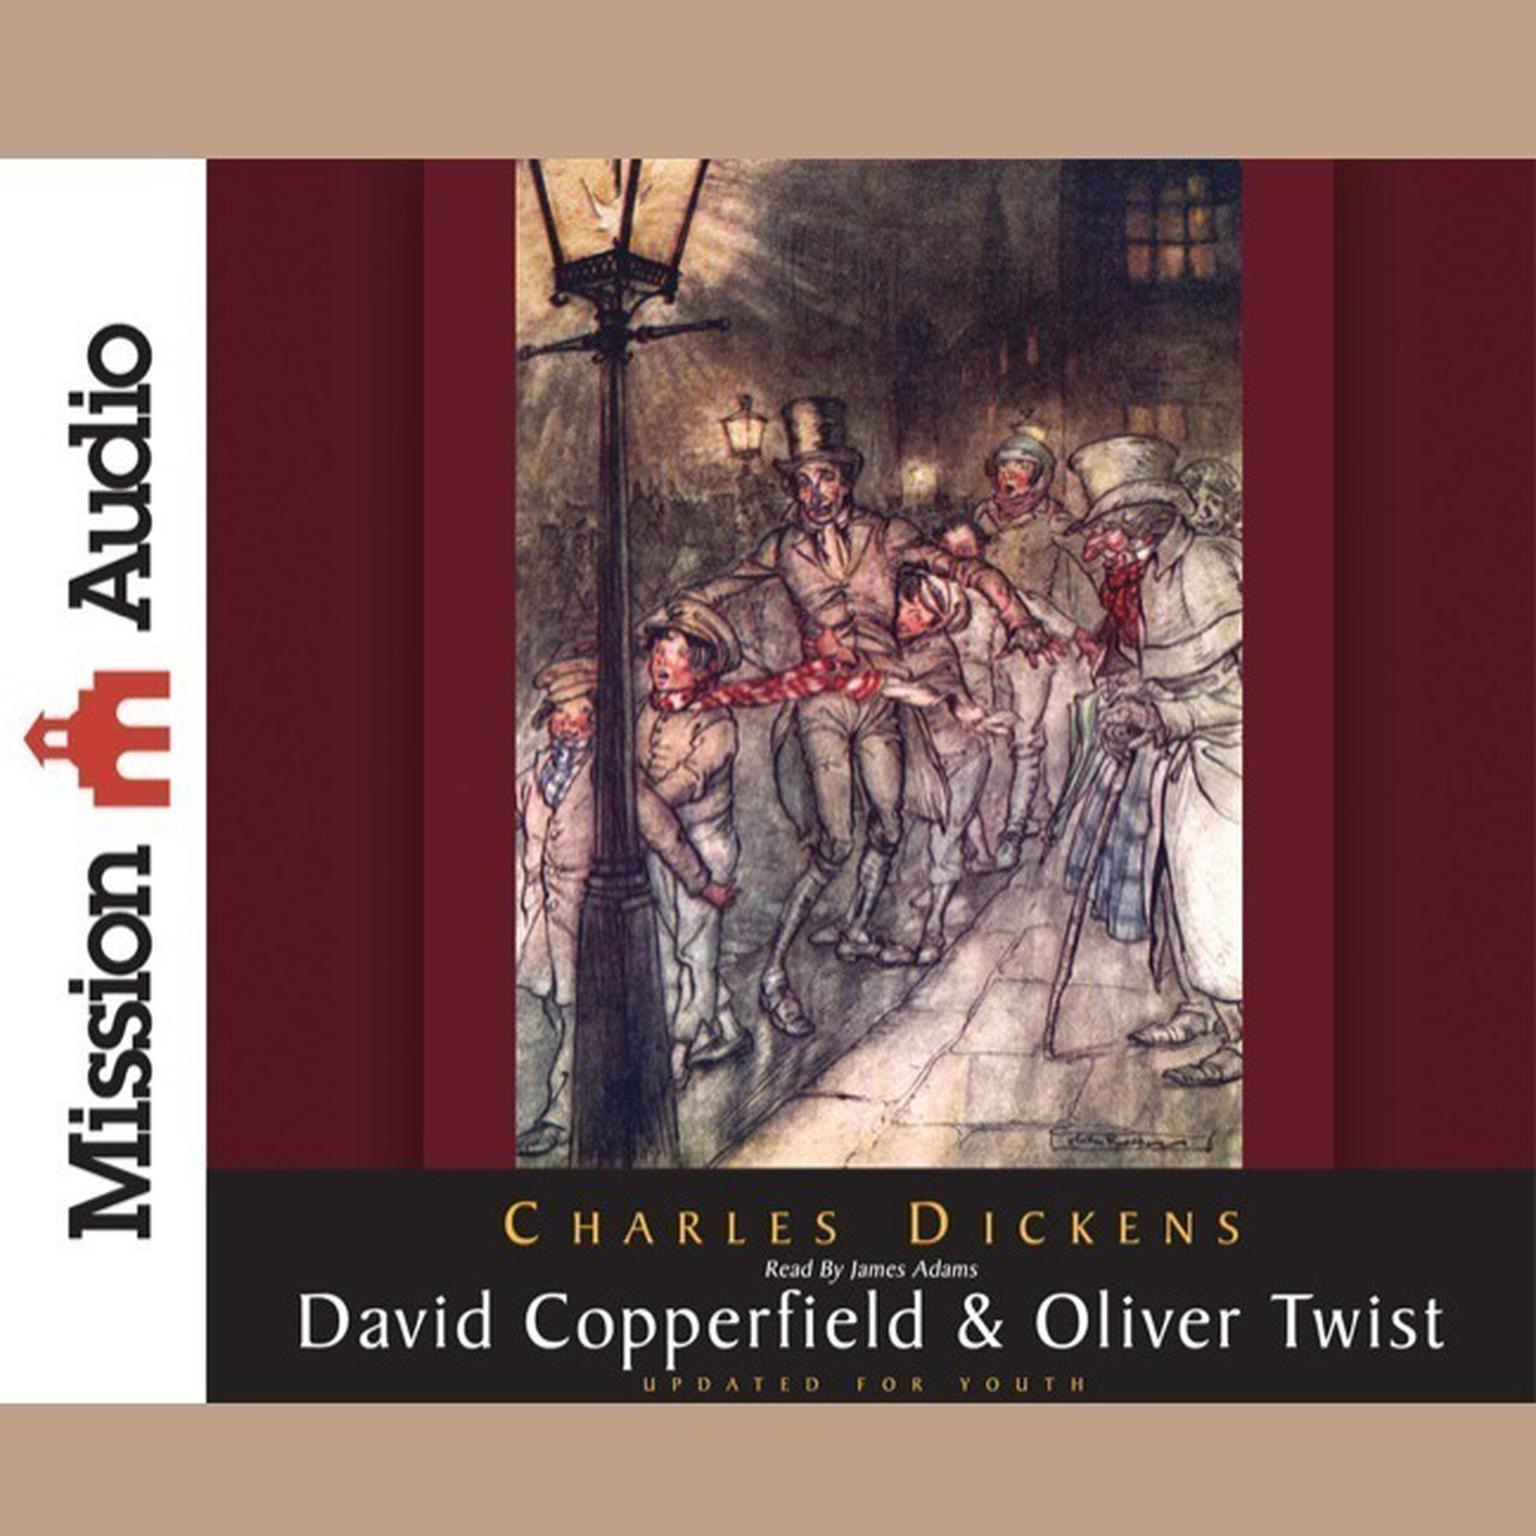 David Copperfield & Oliver Twist (Abridged) Audiobook, by Charles Dickens